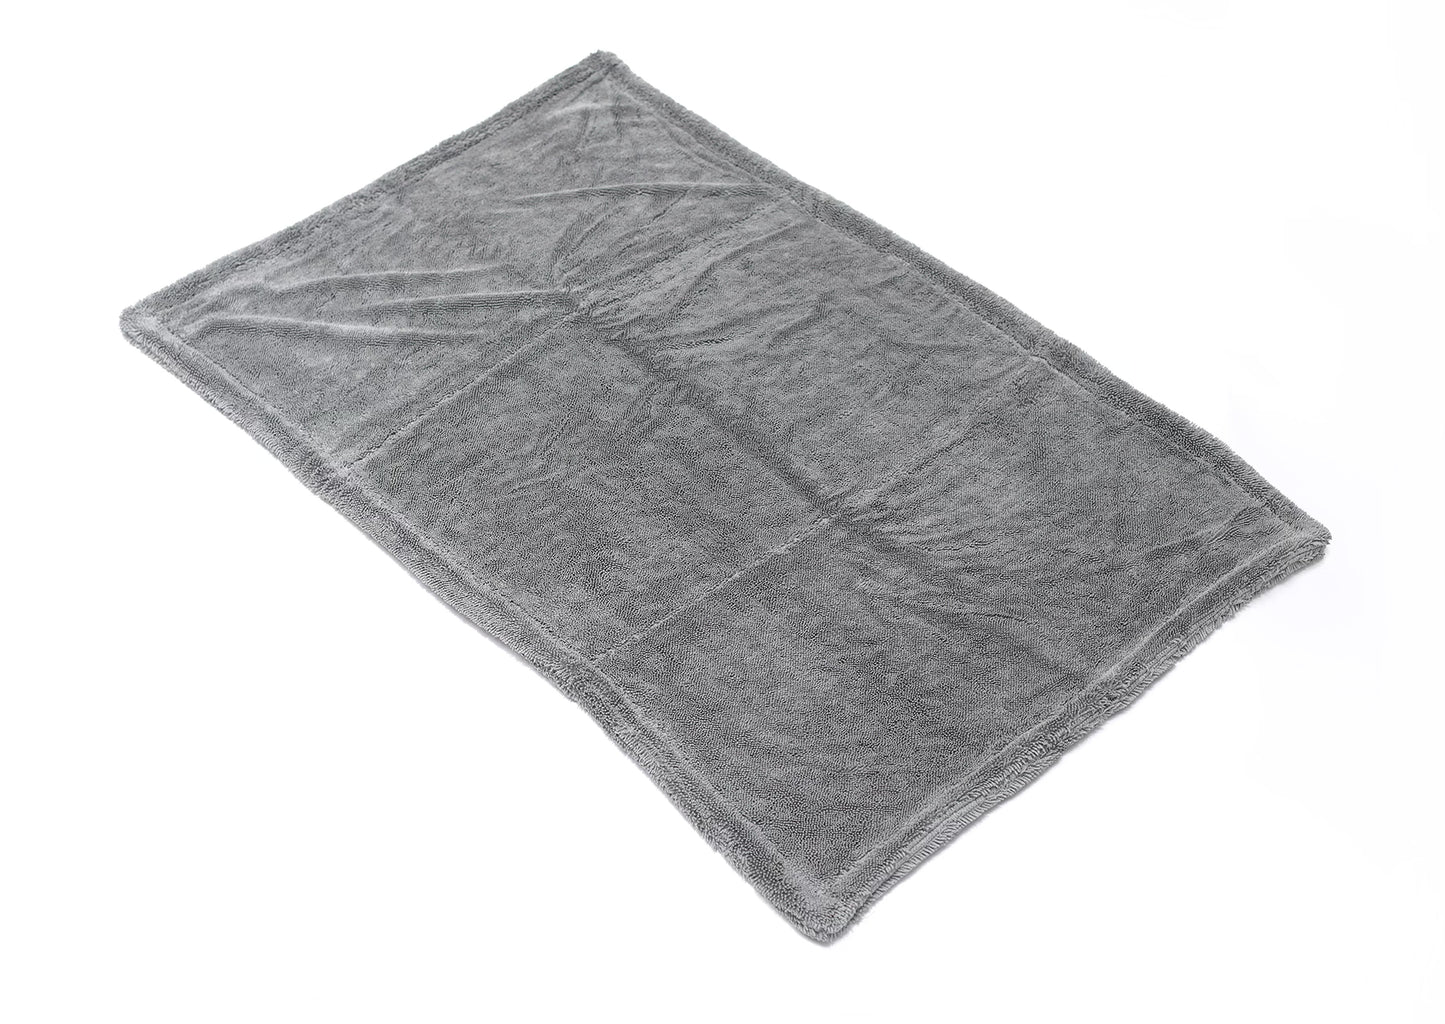 SAVE: Cheat Code Drying Towel (3 Pack)